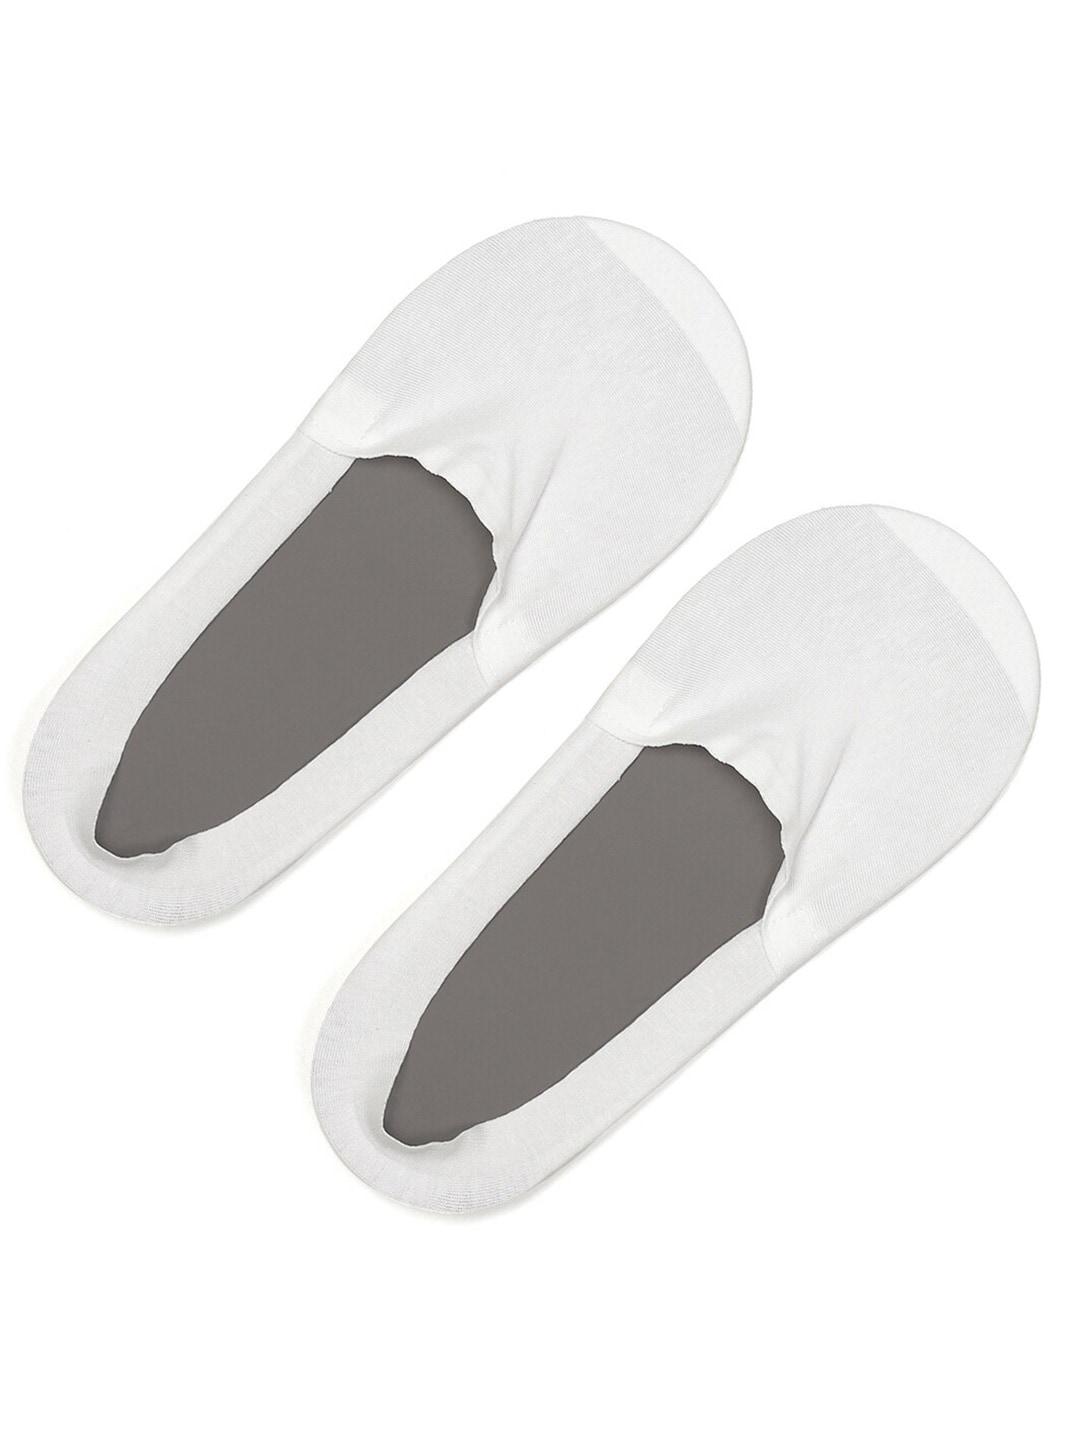 TOFFCRAFT Men White Solid Shoe Liners